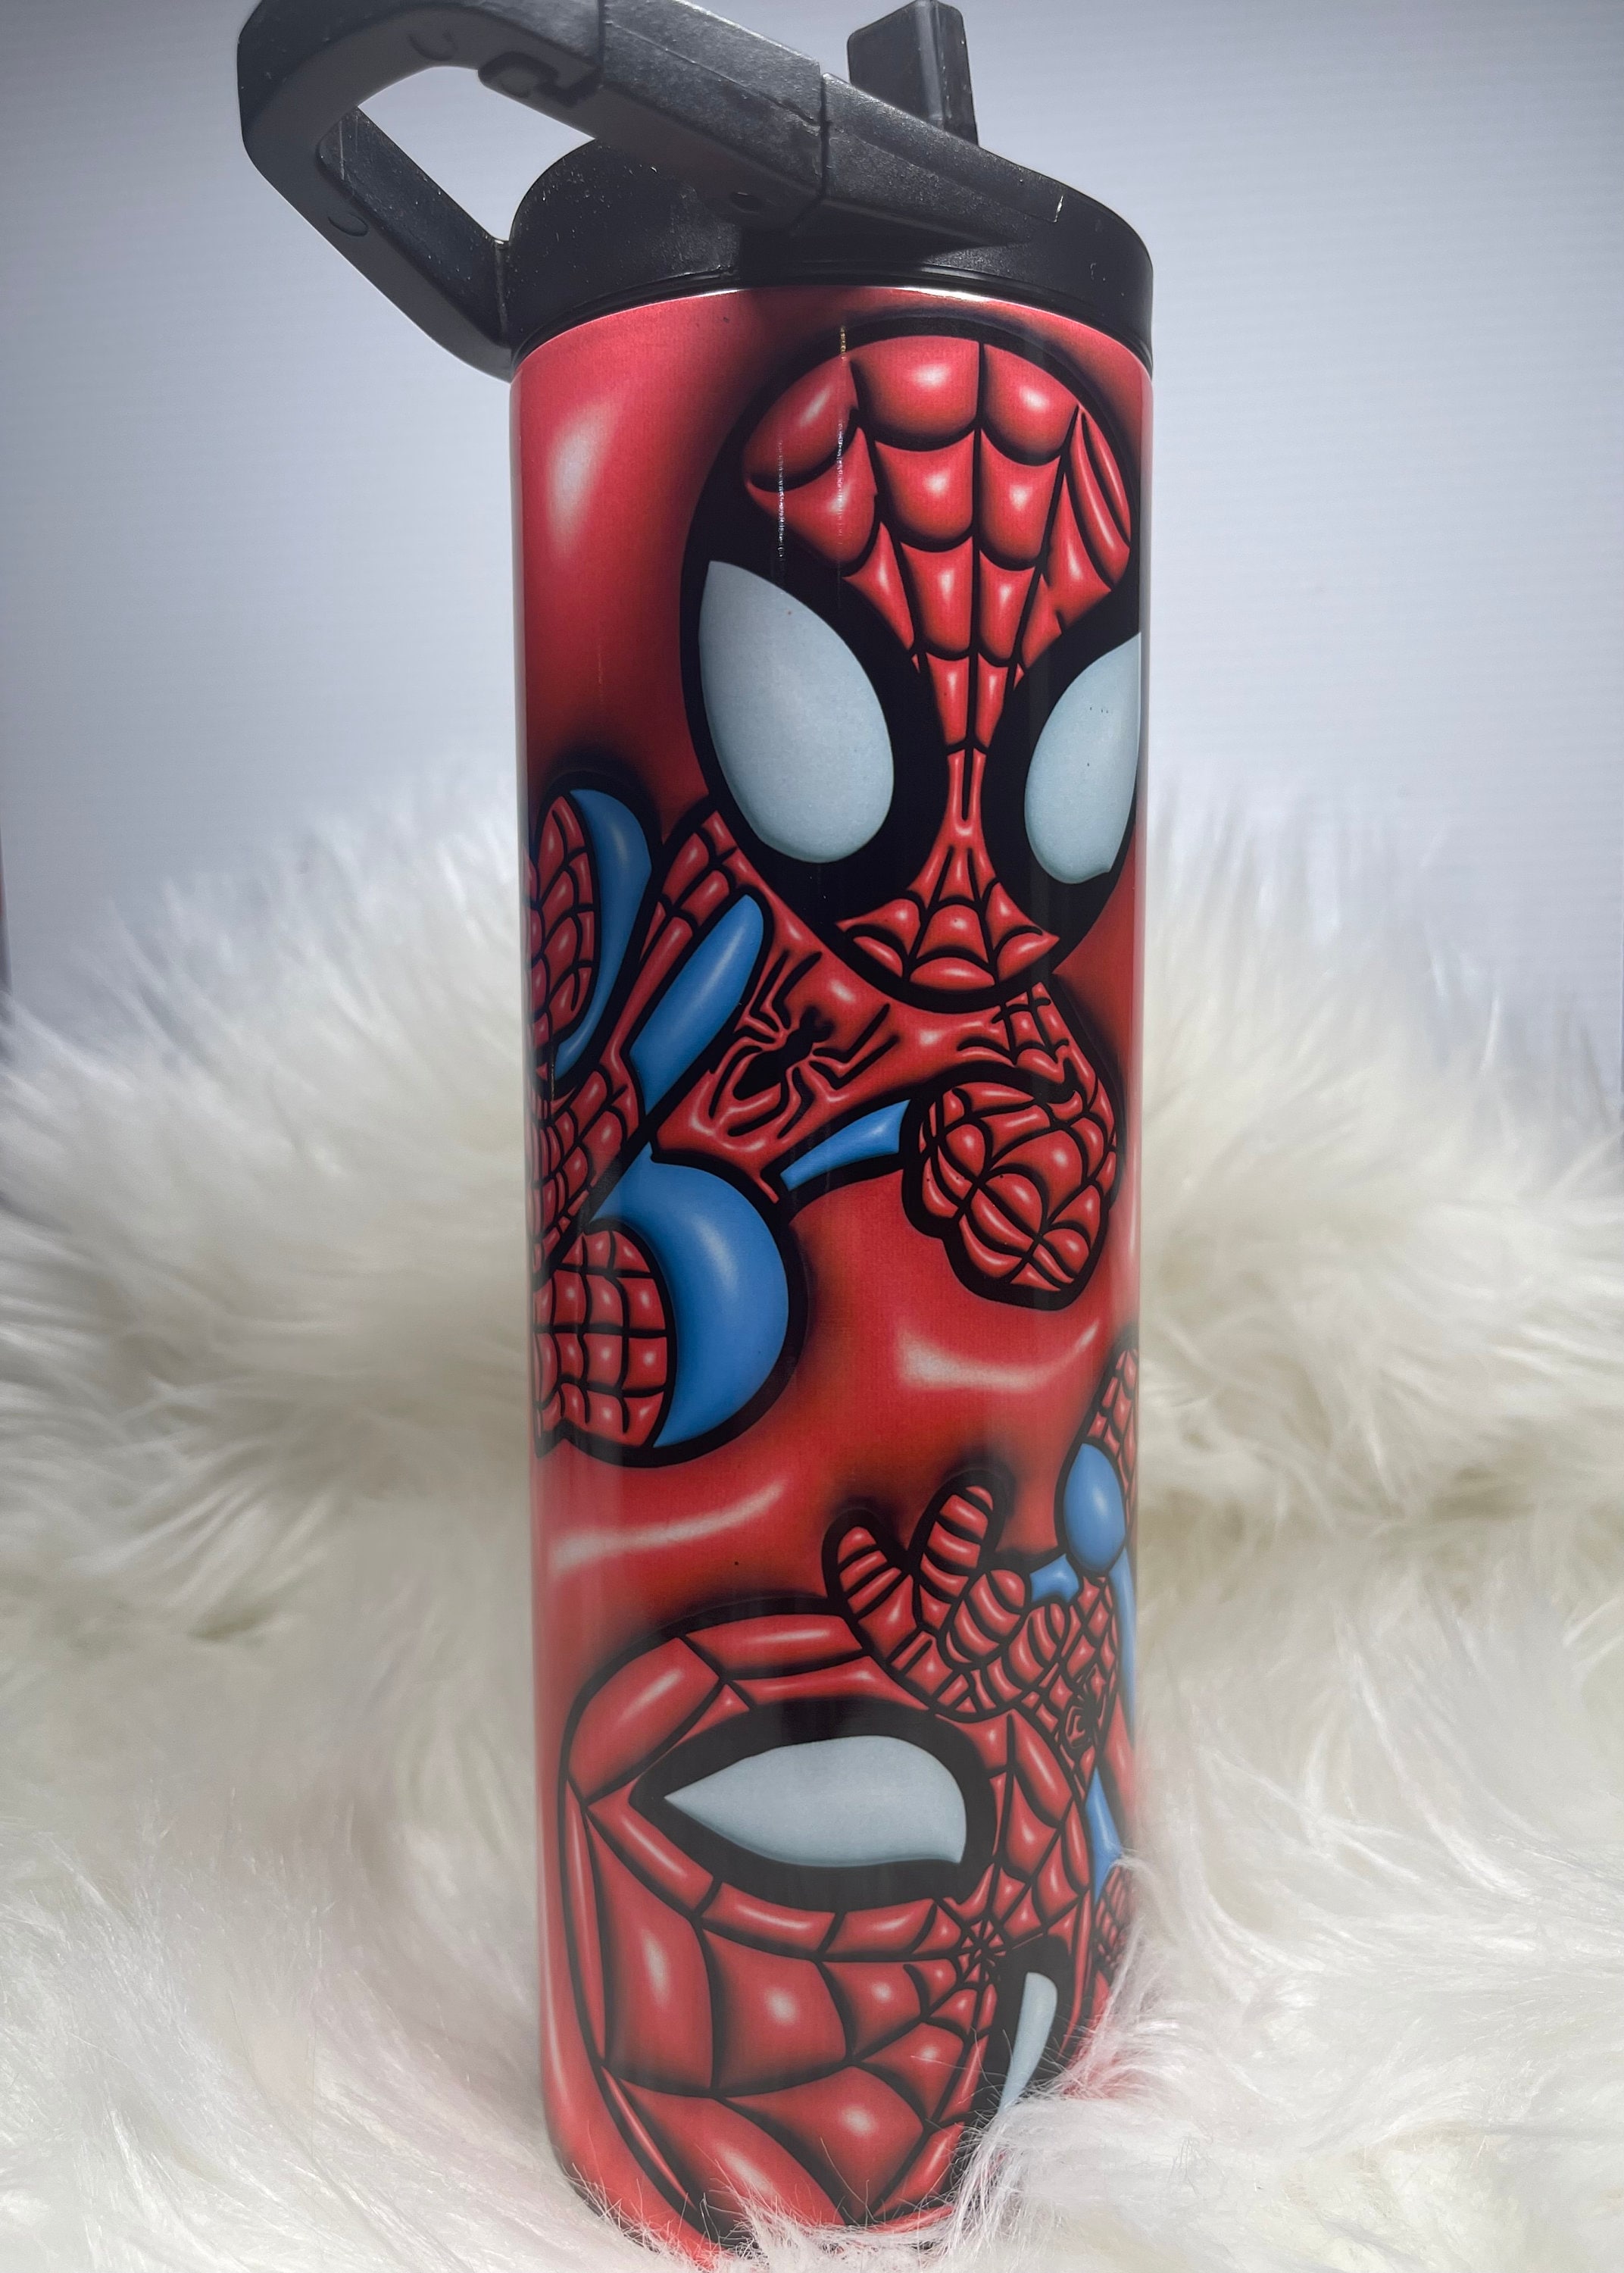 Thermos 16oz FUNtainer Water Bottle with Bail Handle - Spider-Man 1 ct